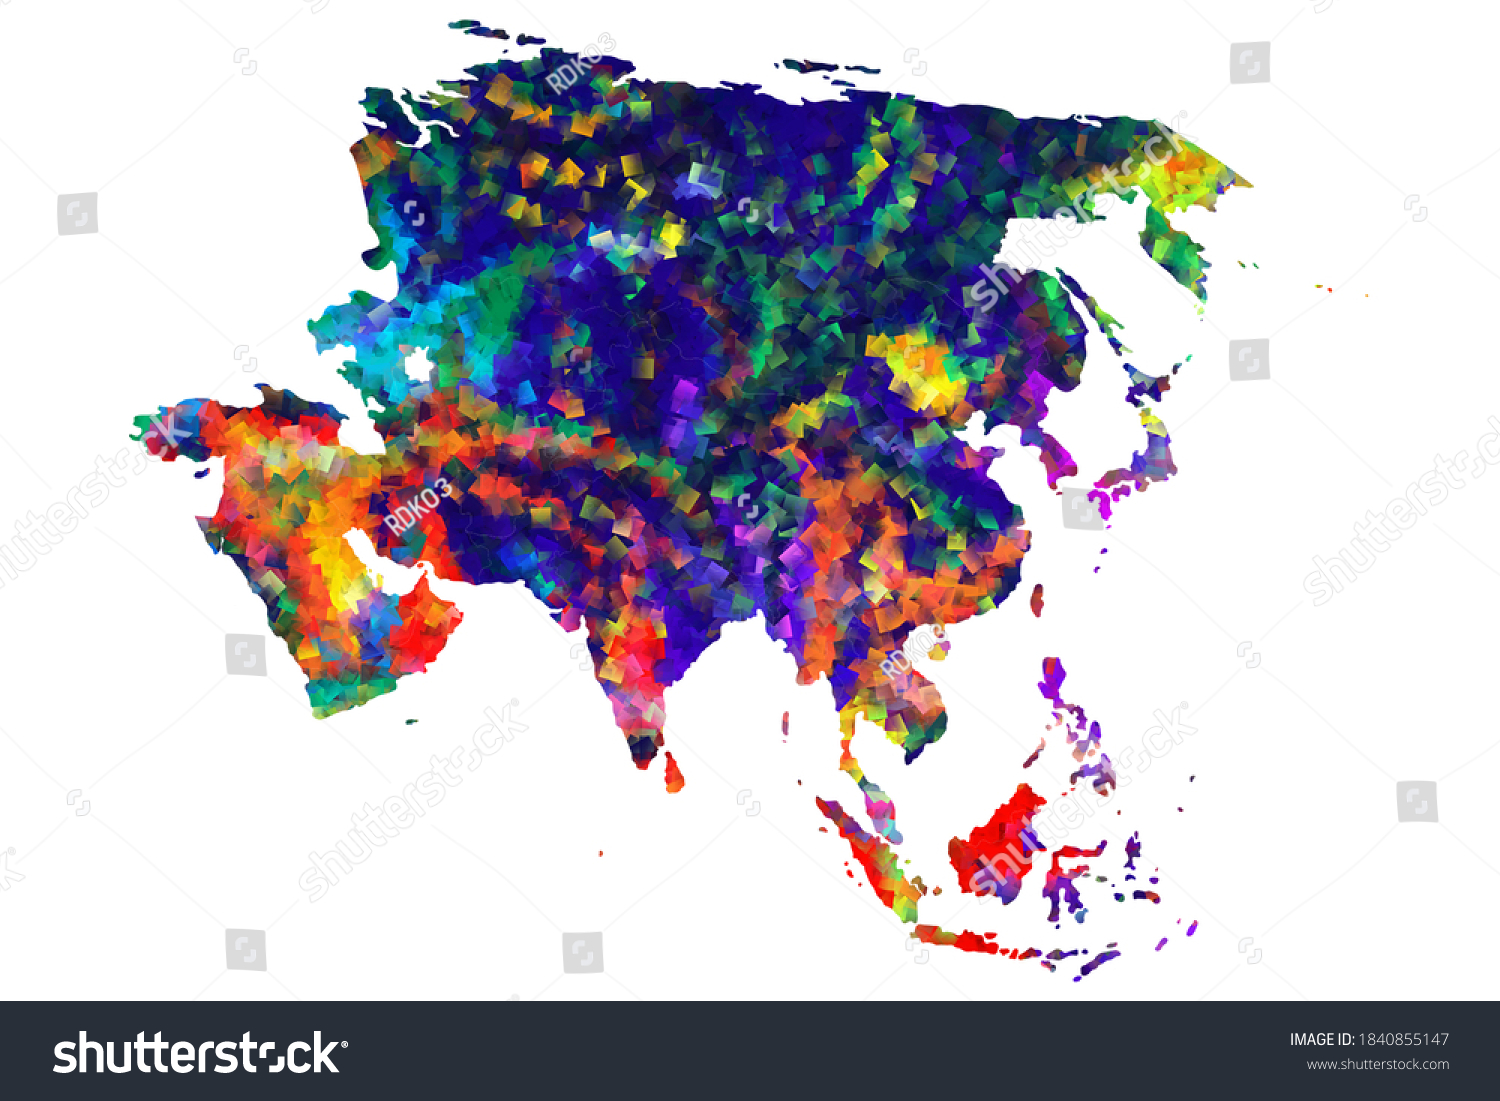 Colorful Asia Map Vector Design Stock Vector Royalty Free 1840855147